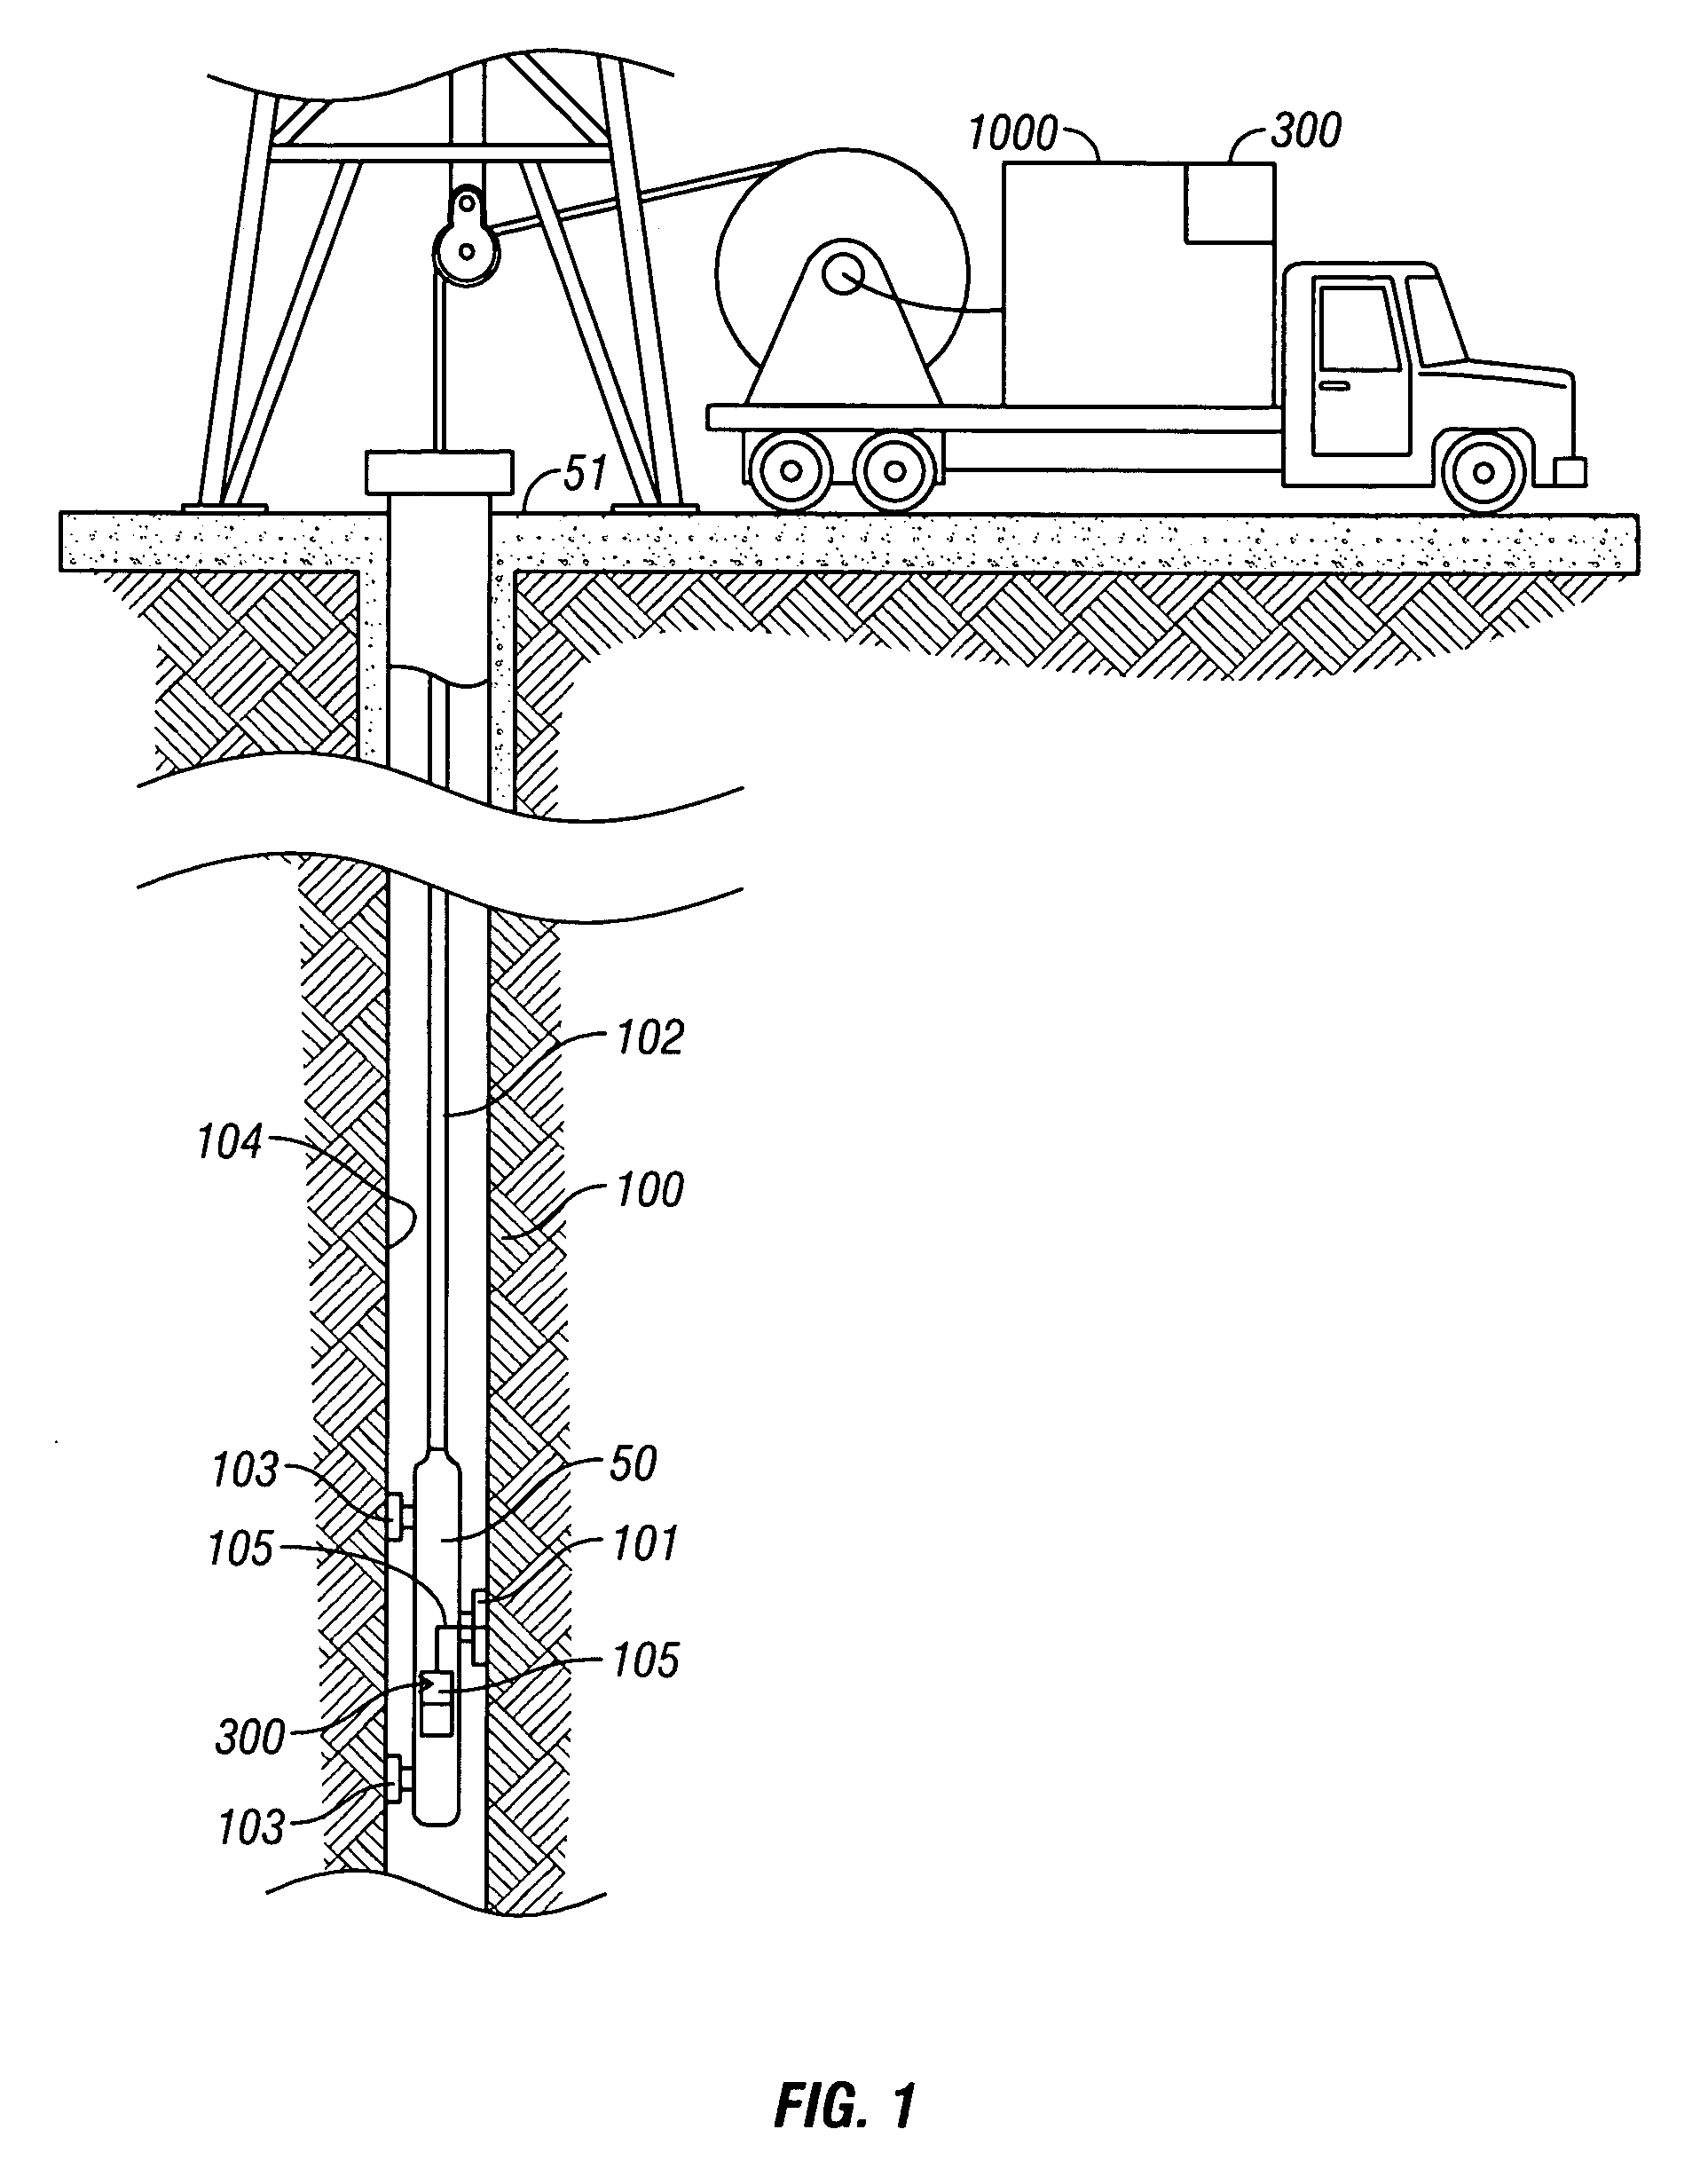 Method and apparatus for reservoir characterization using photoacoustic spectroscopy